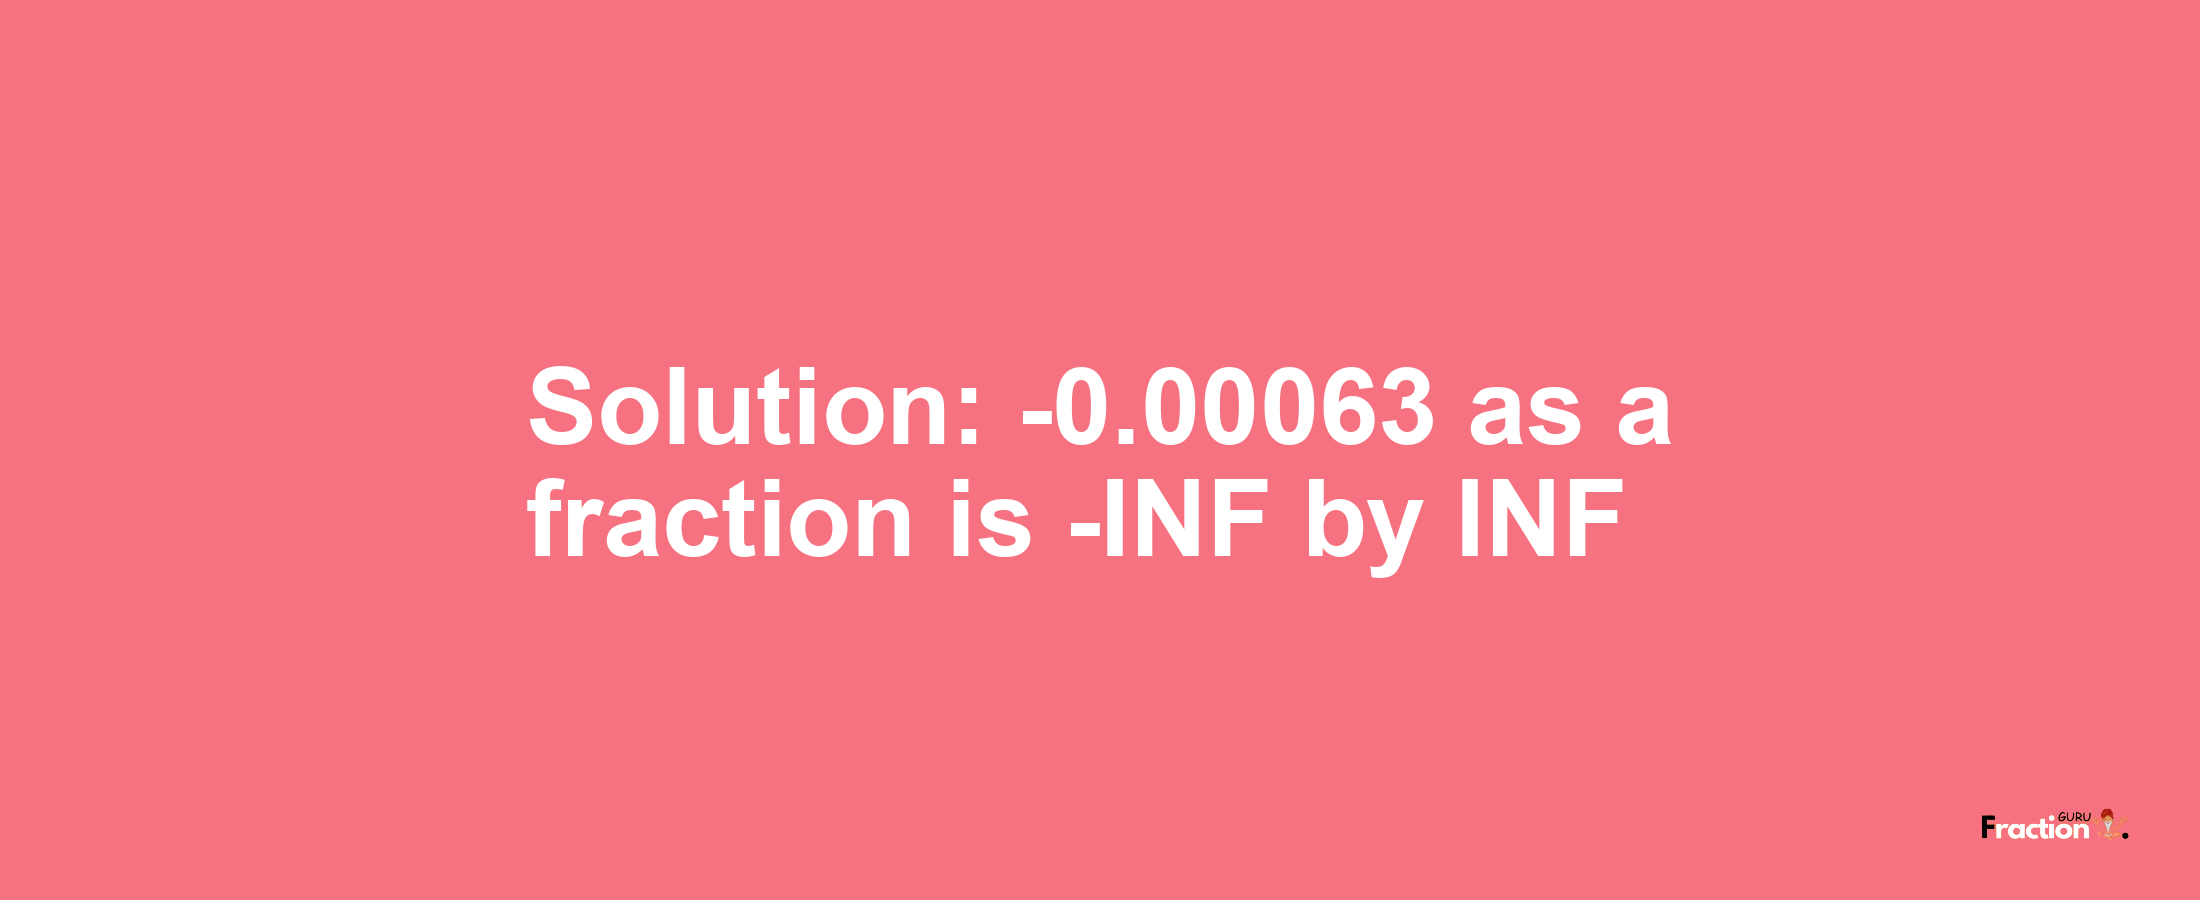 Solution:-0.00063 as a fraction is -INF/INF